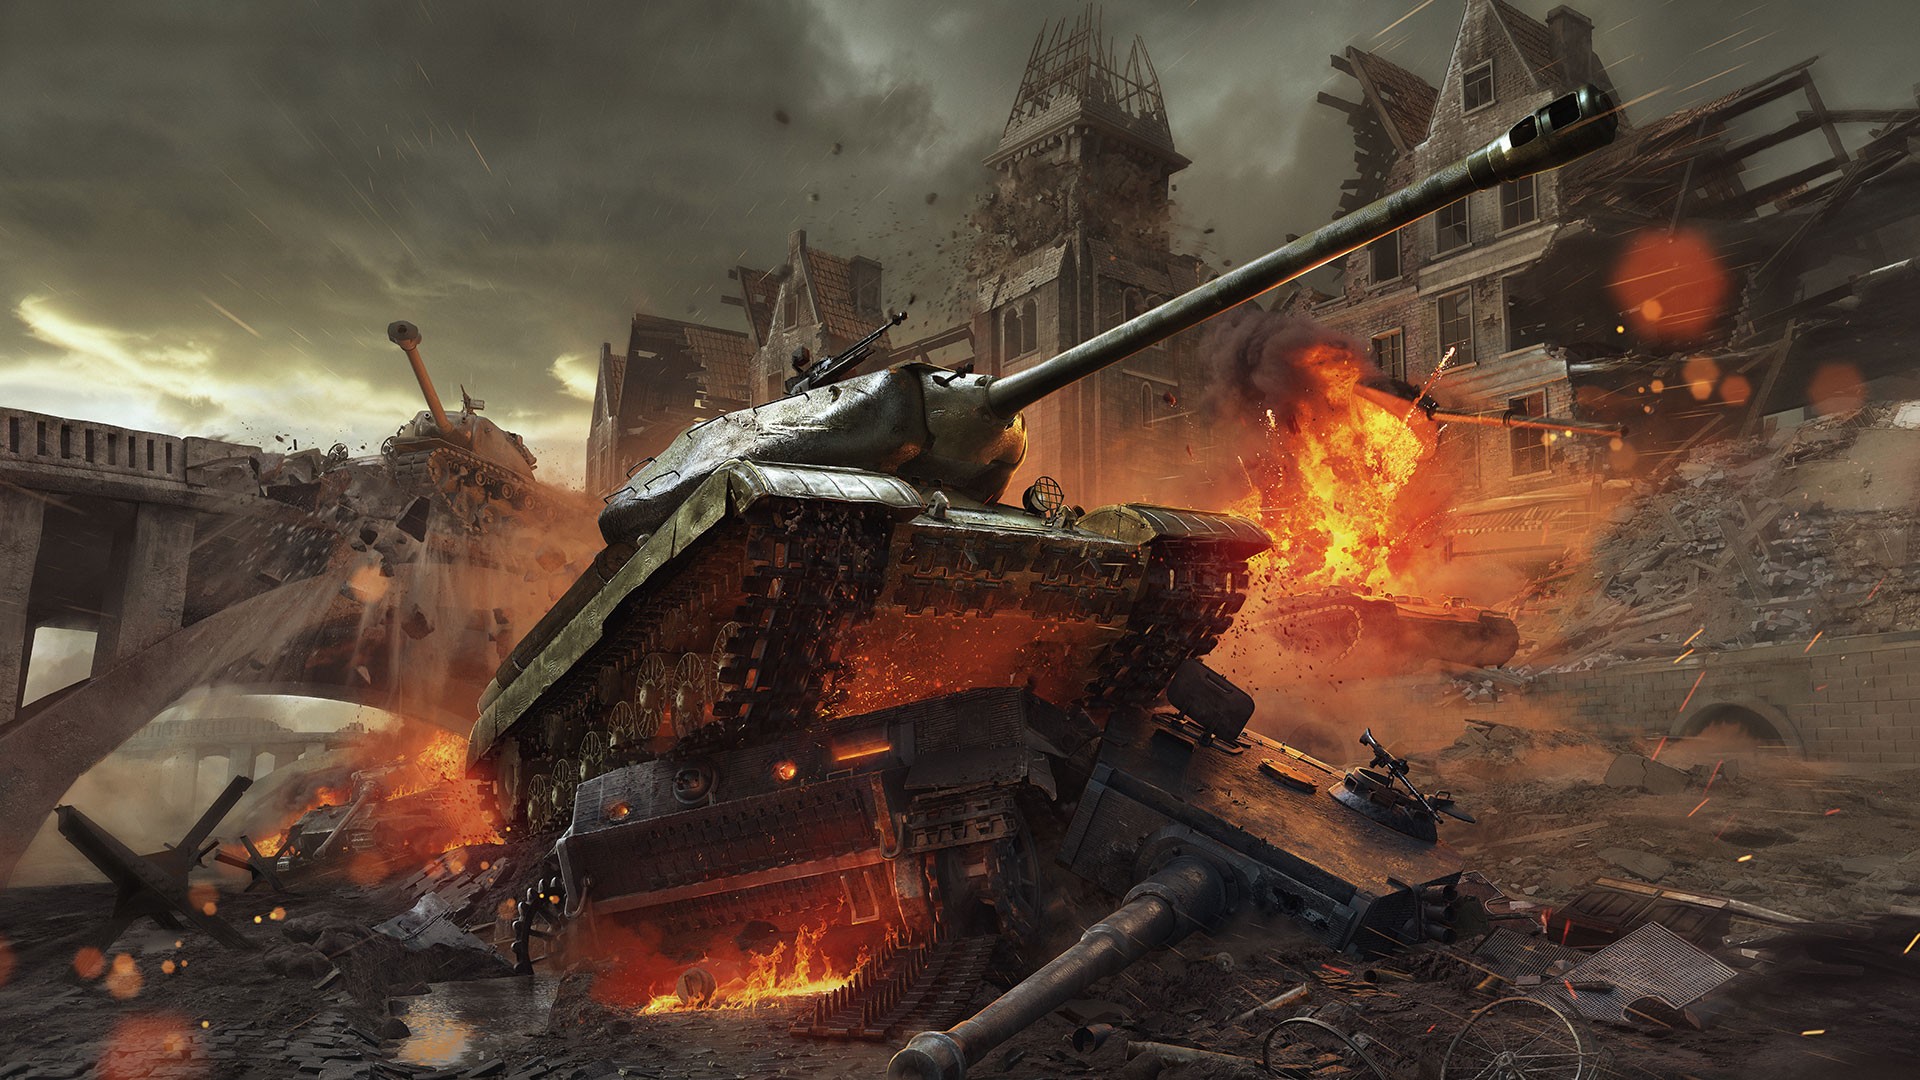 How To Set Up A Game Controller For World Of Tanks